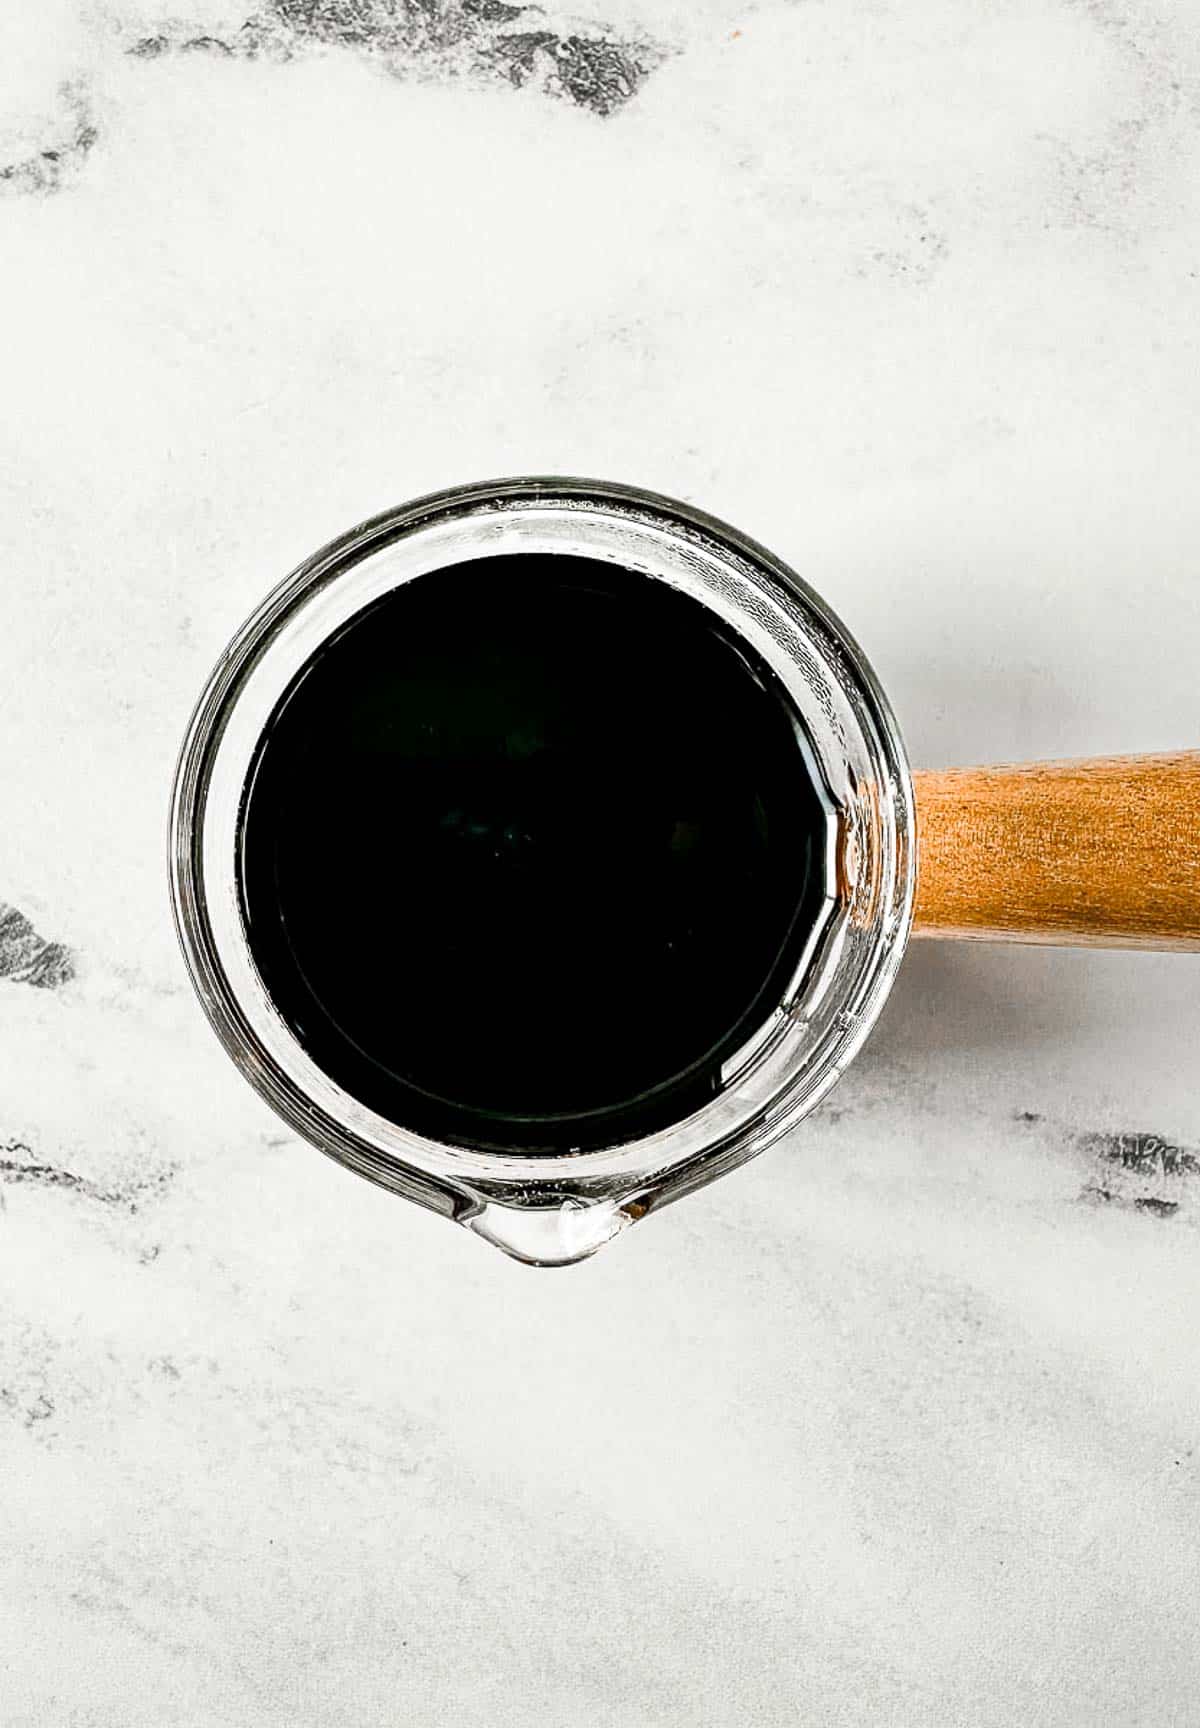 Balsamic glaze in a small glass serving vessel.